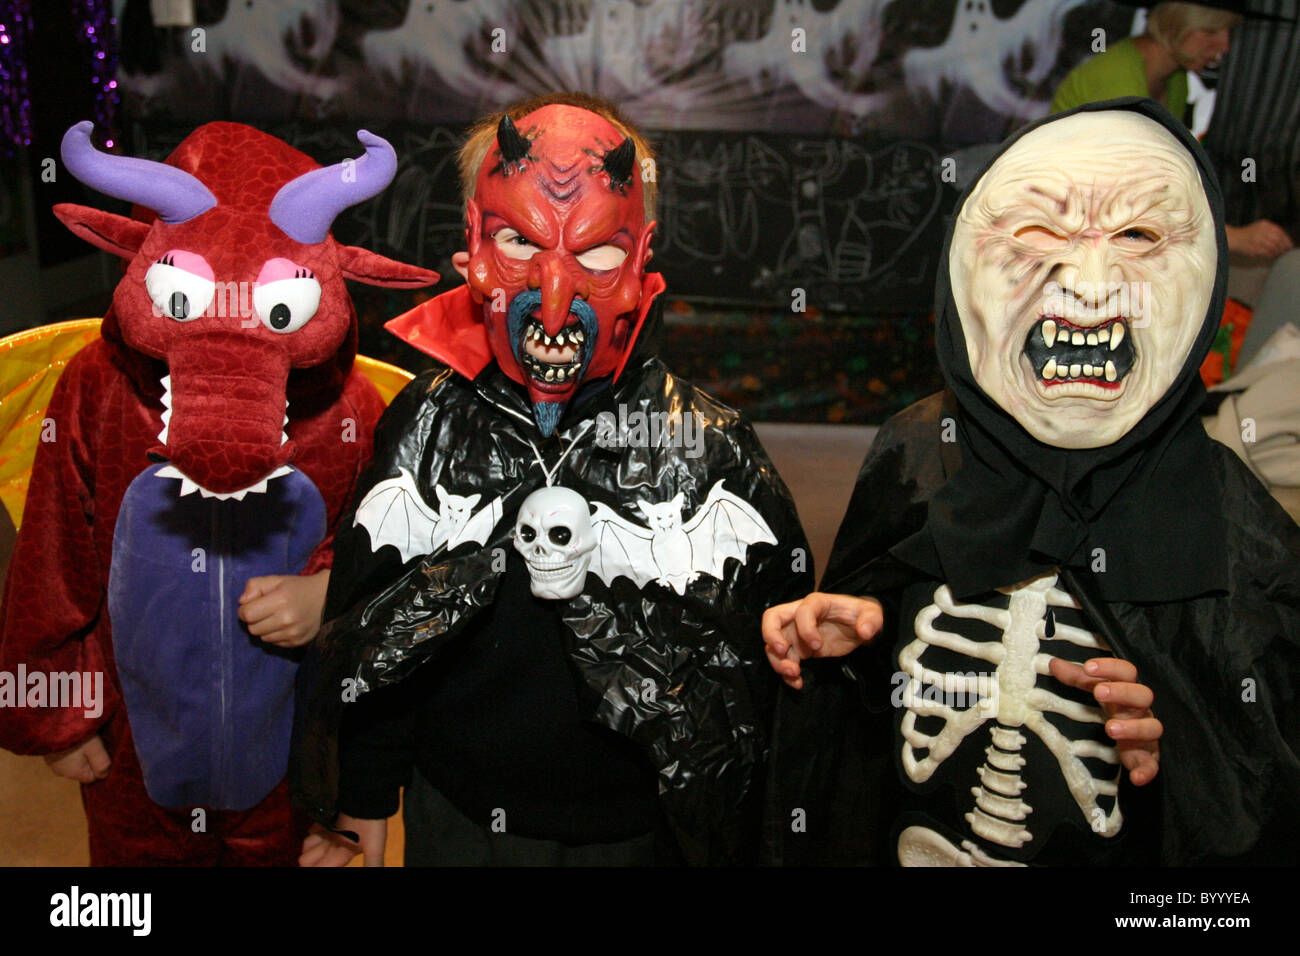 Children dressed up in spooky Halloween costumes ready to go trick or treating Stock Photo